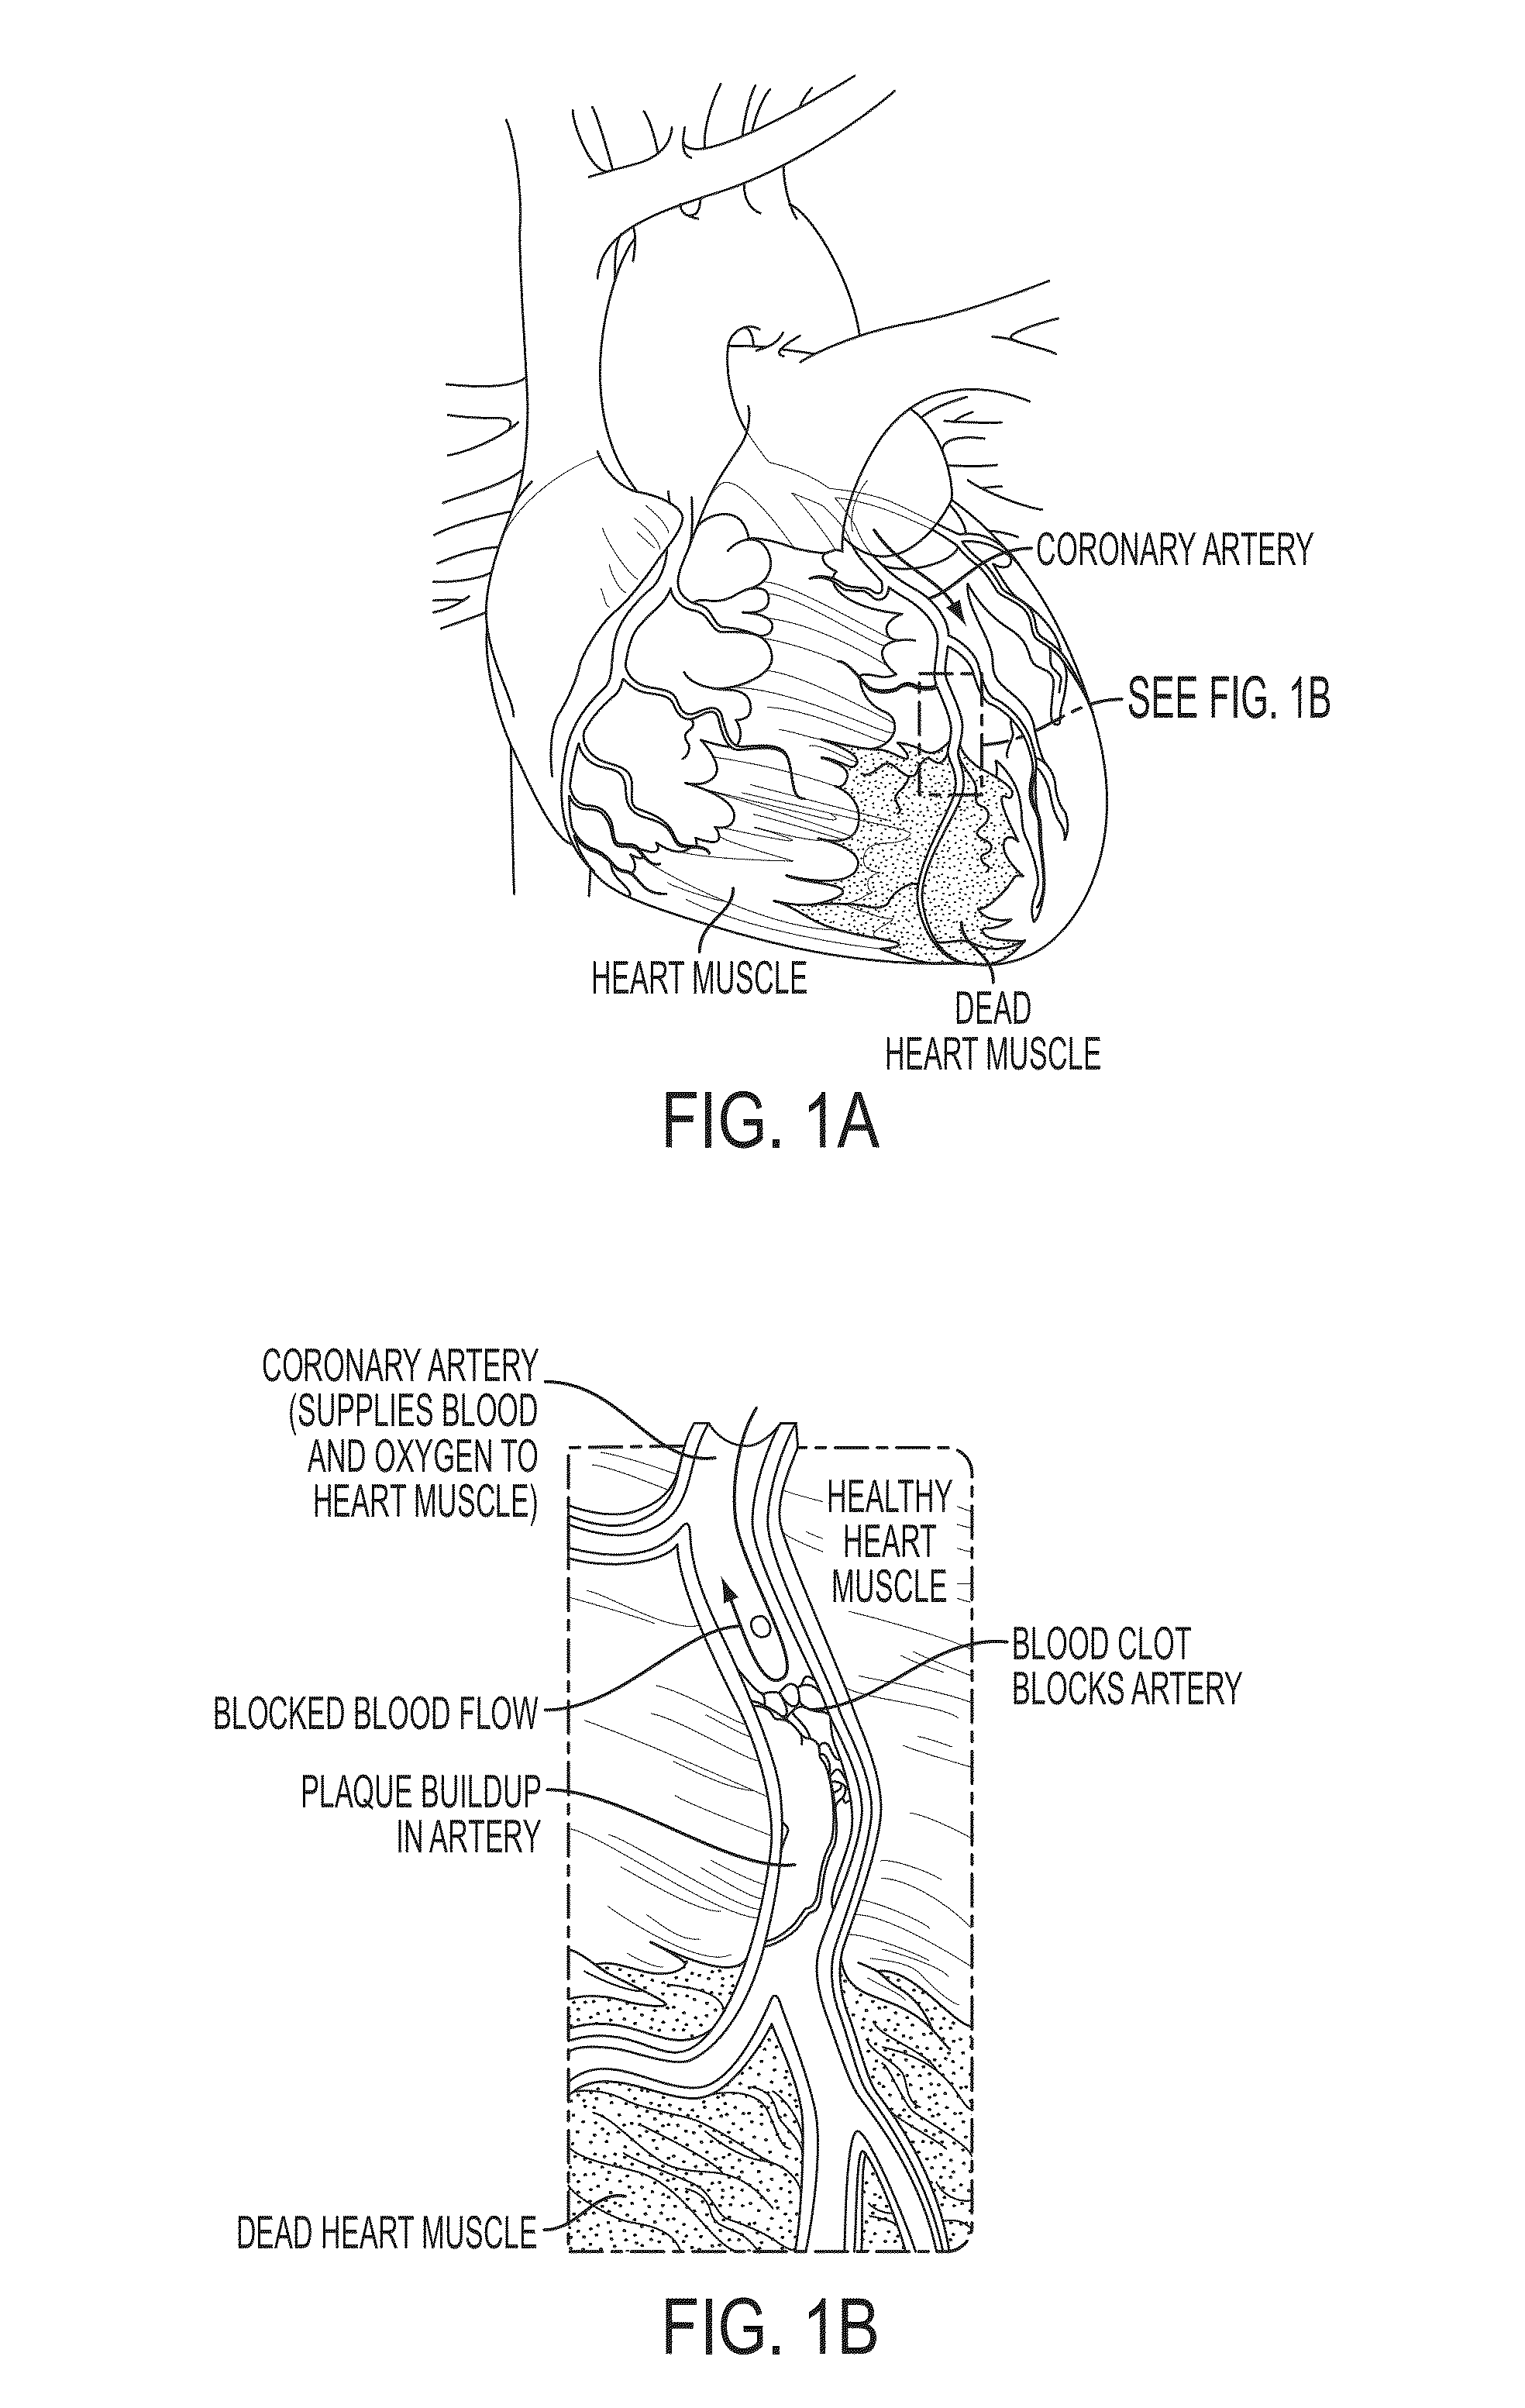 Method and System for Multi-Scale Anatomical and Functional Modeling of Coronary Circulation